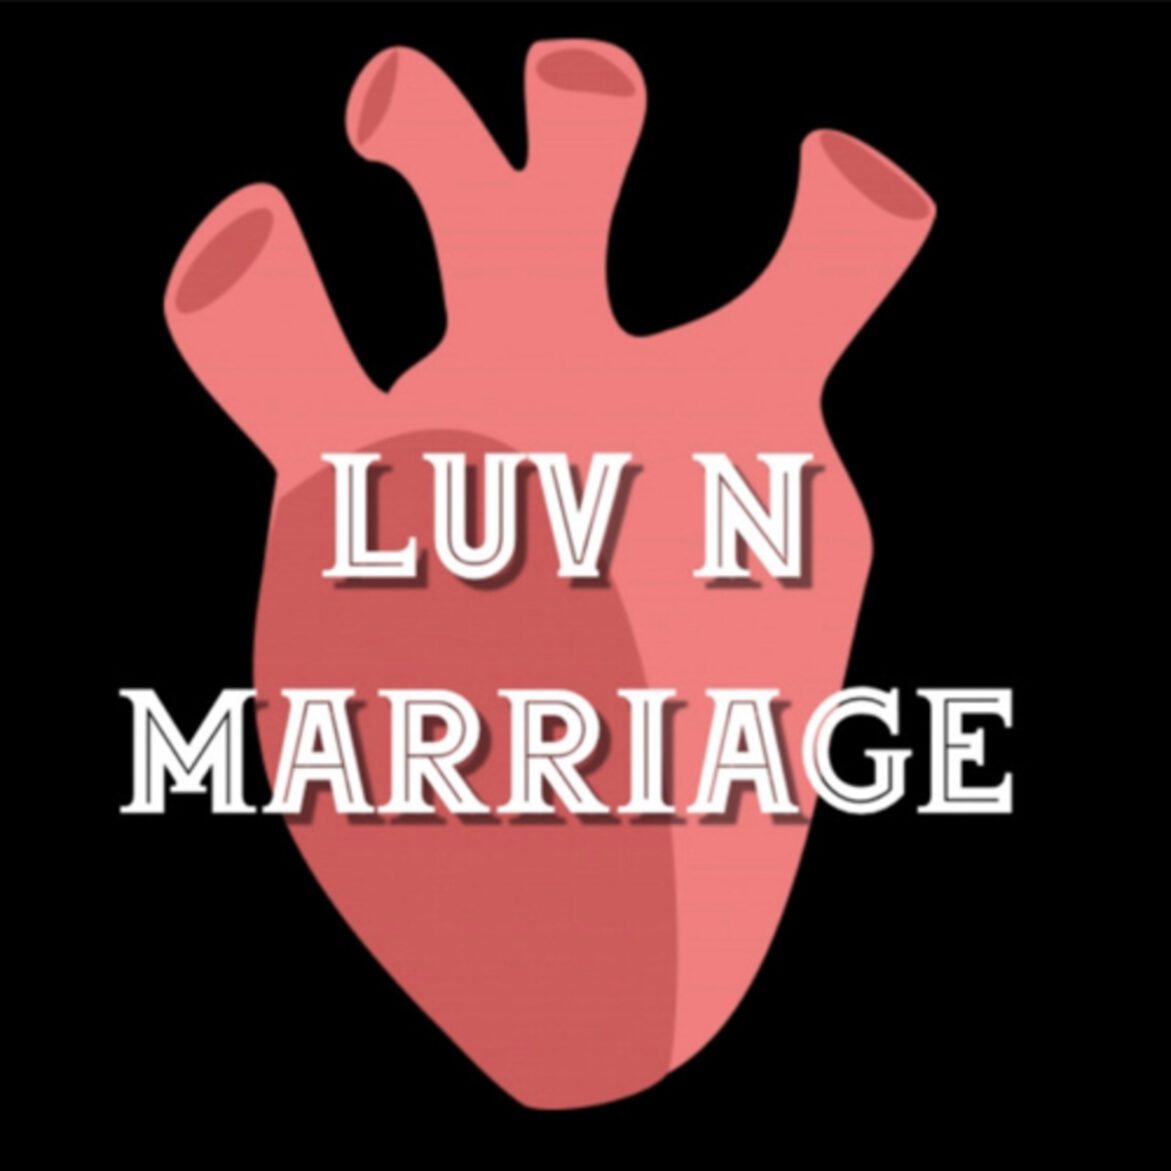 Black Podcasting - Luv N Marriage Ep 3